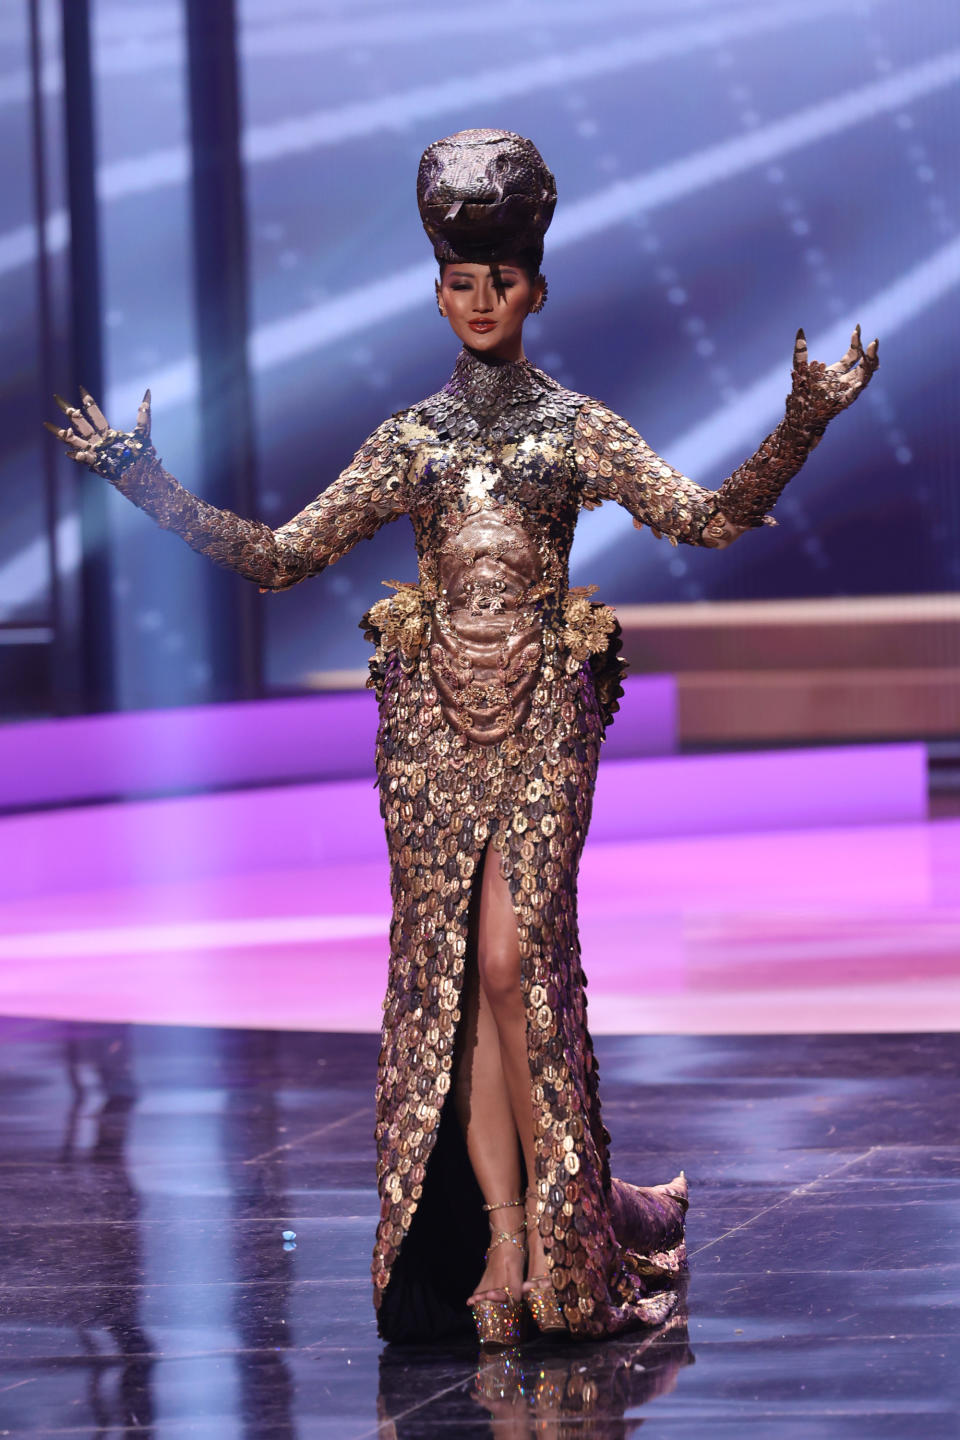 PHOTOS: Miss Universe 2020 National Costume competition